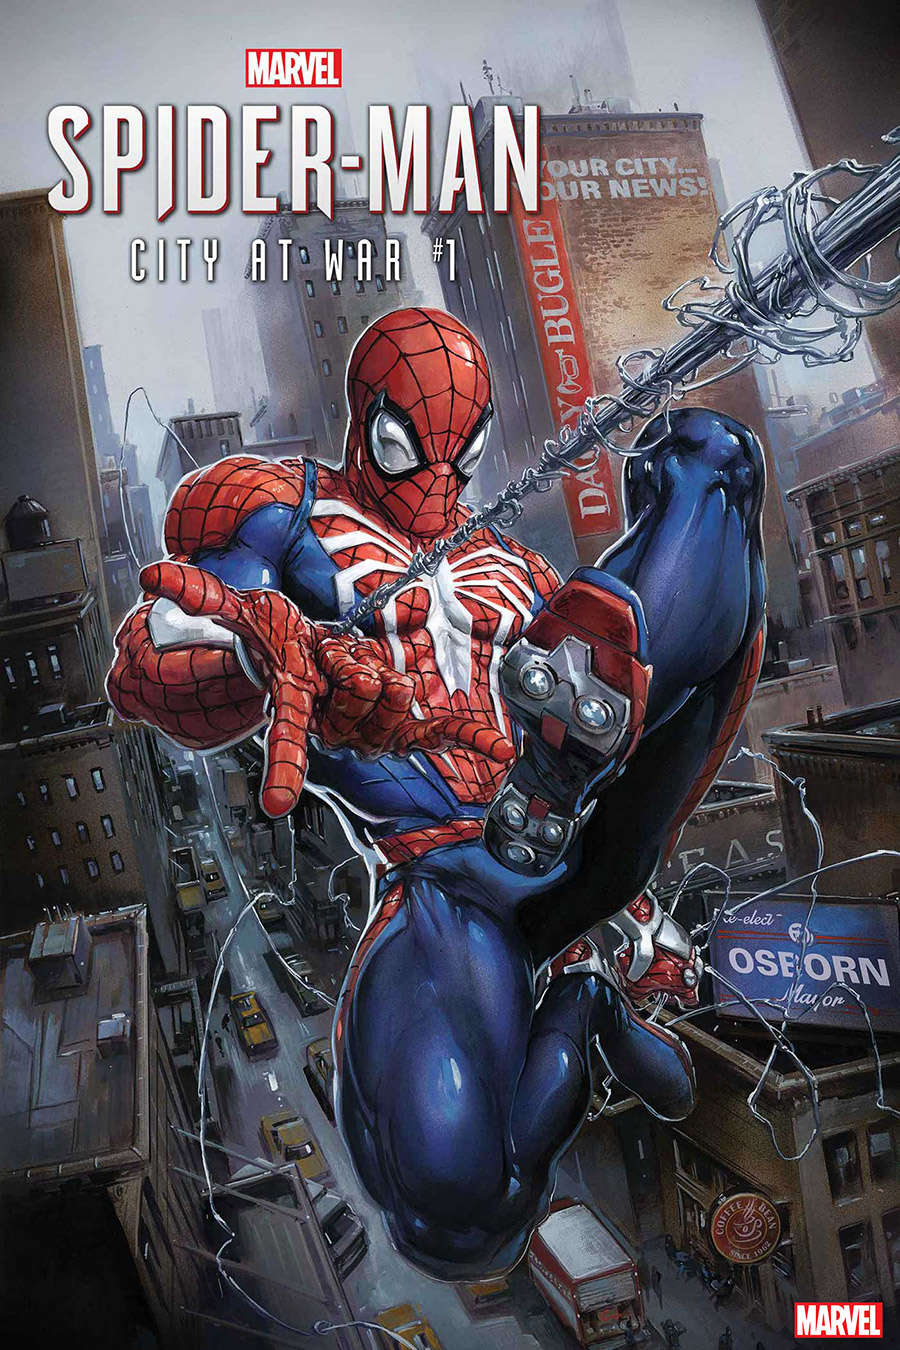 SPIDER-MAN: CITY AT WAR #1 Cover by CLAYTON CRAIN